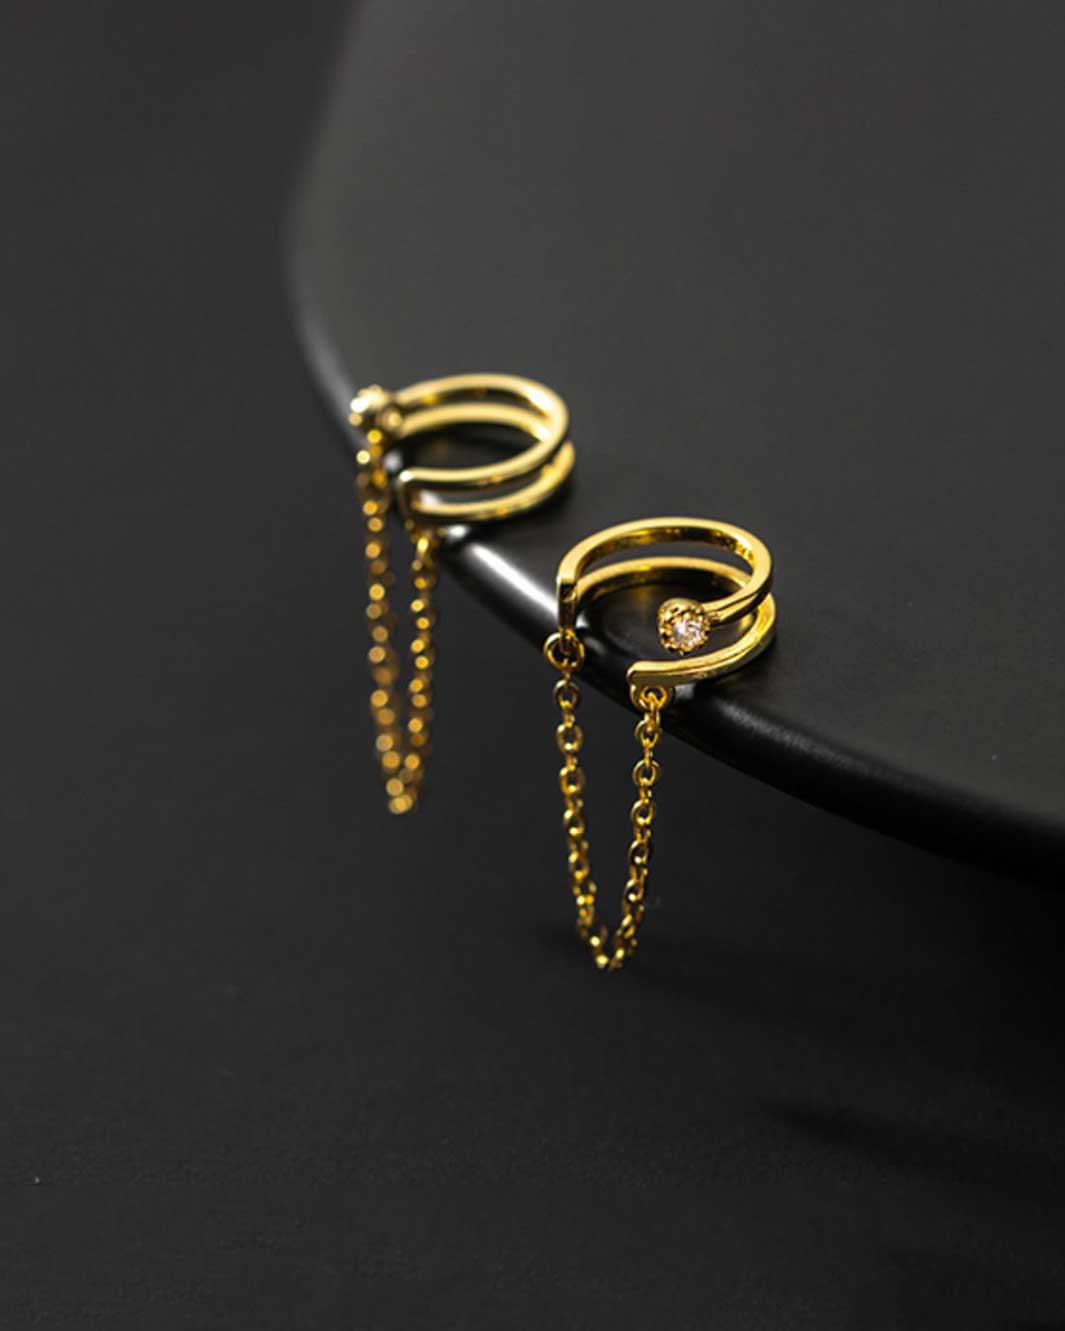 Layer Ear Cuffs with Dangling Chain